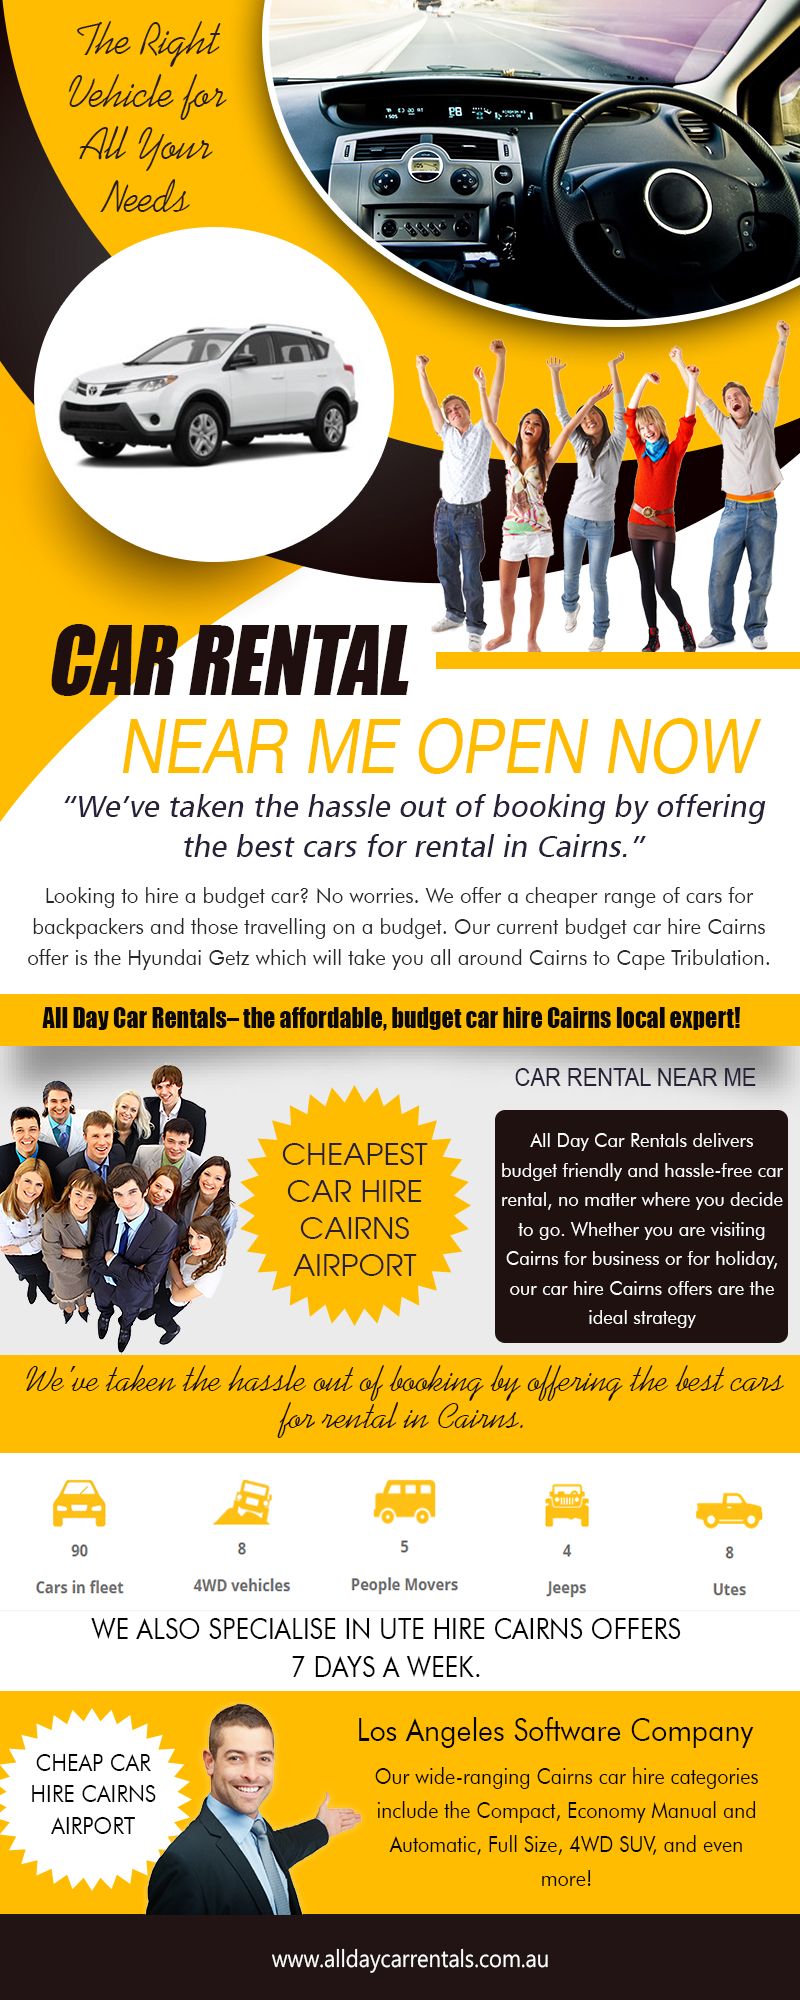 Car Rental Near Me Open Now - Site Pictures